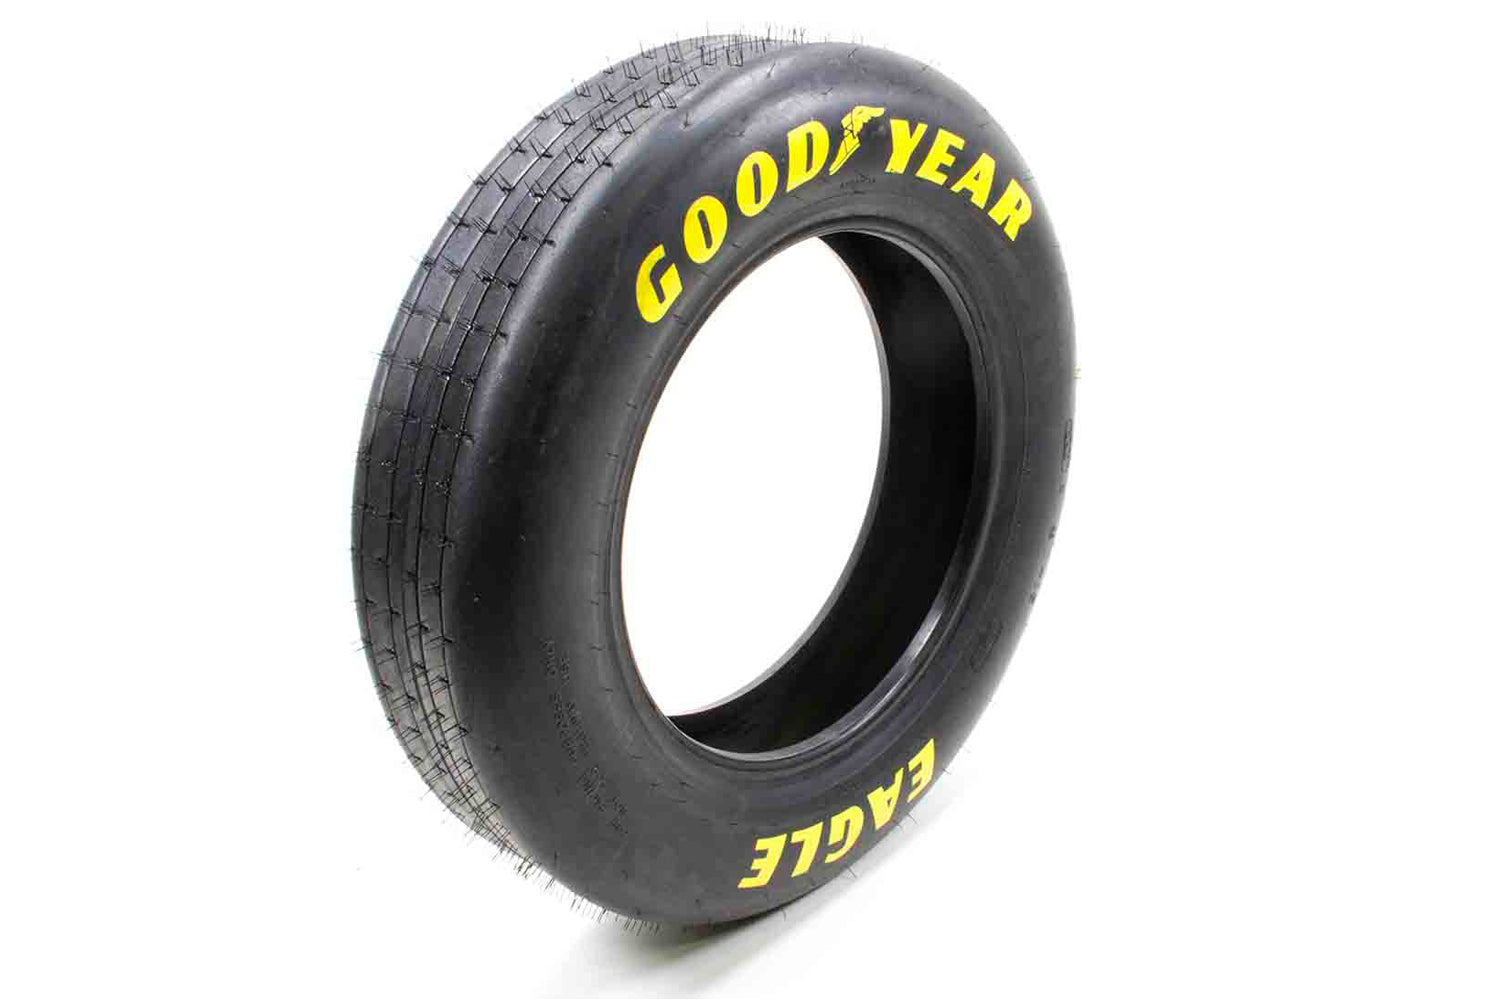 Goodyear 23.0/5.0-15 Front Runner GDYD2989